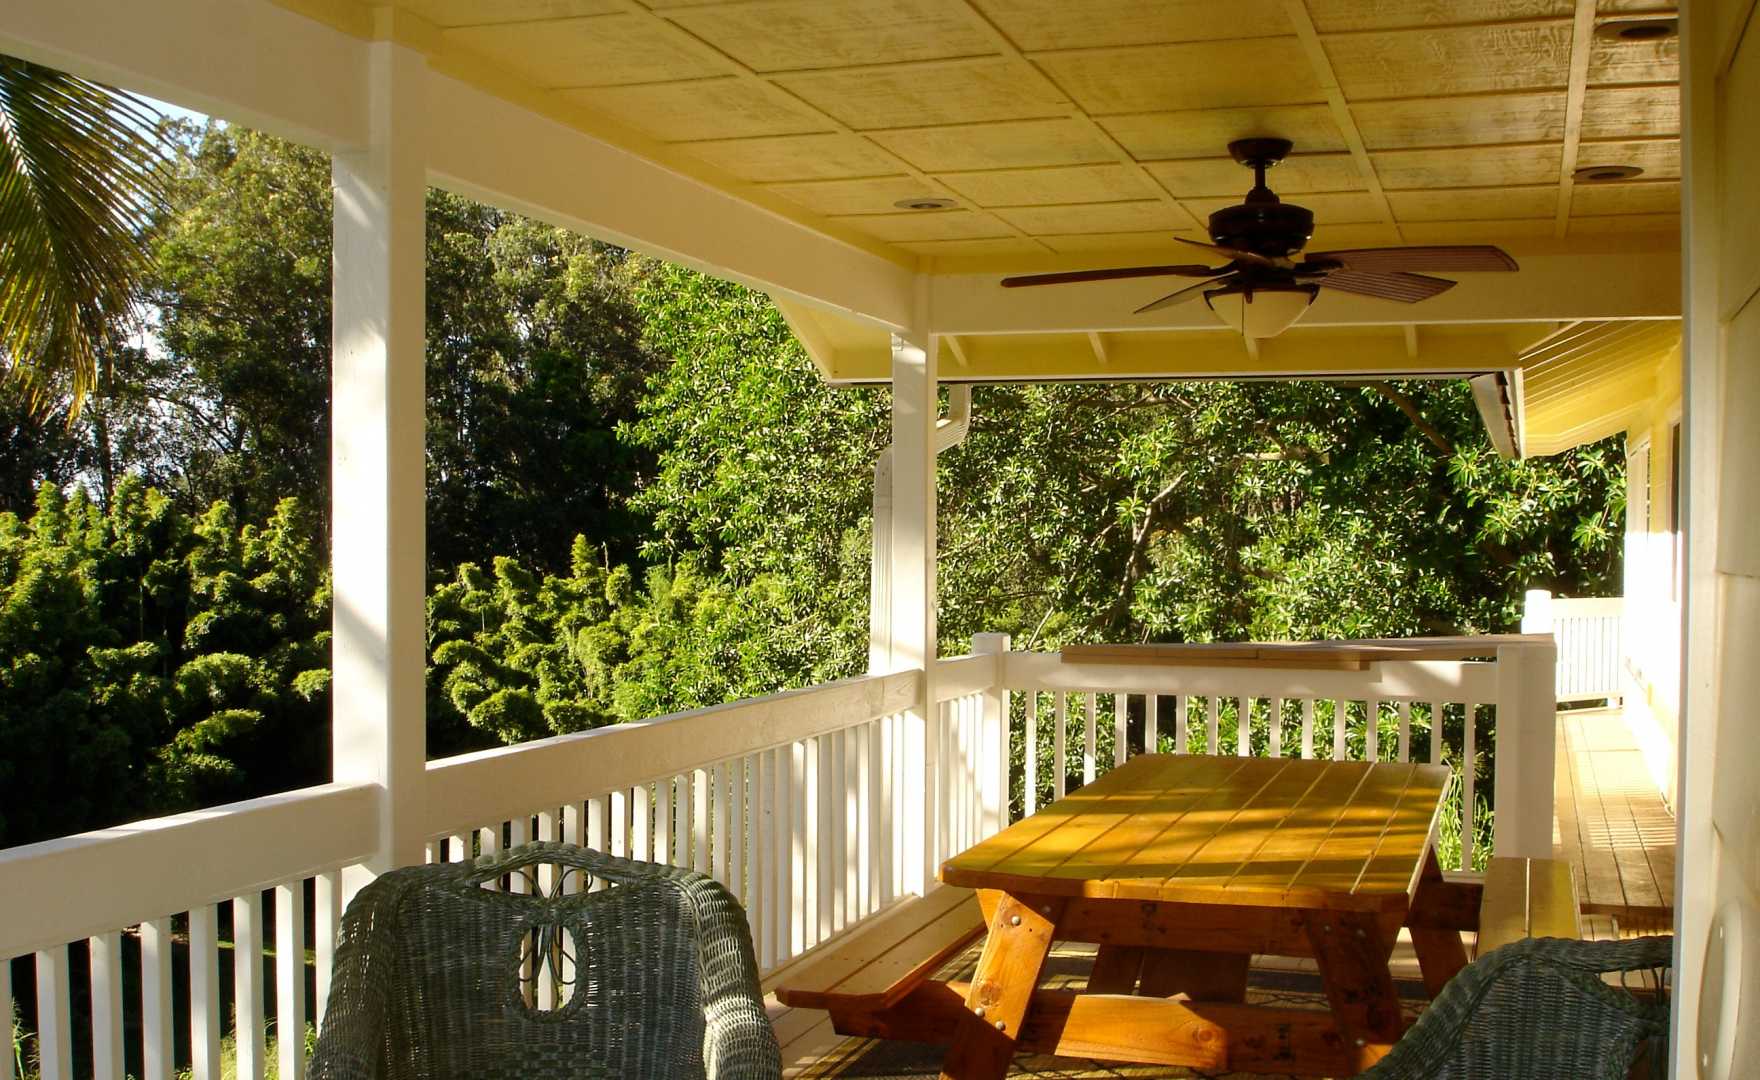 Outdoor covered lanai with gas grill.